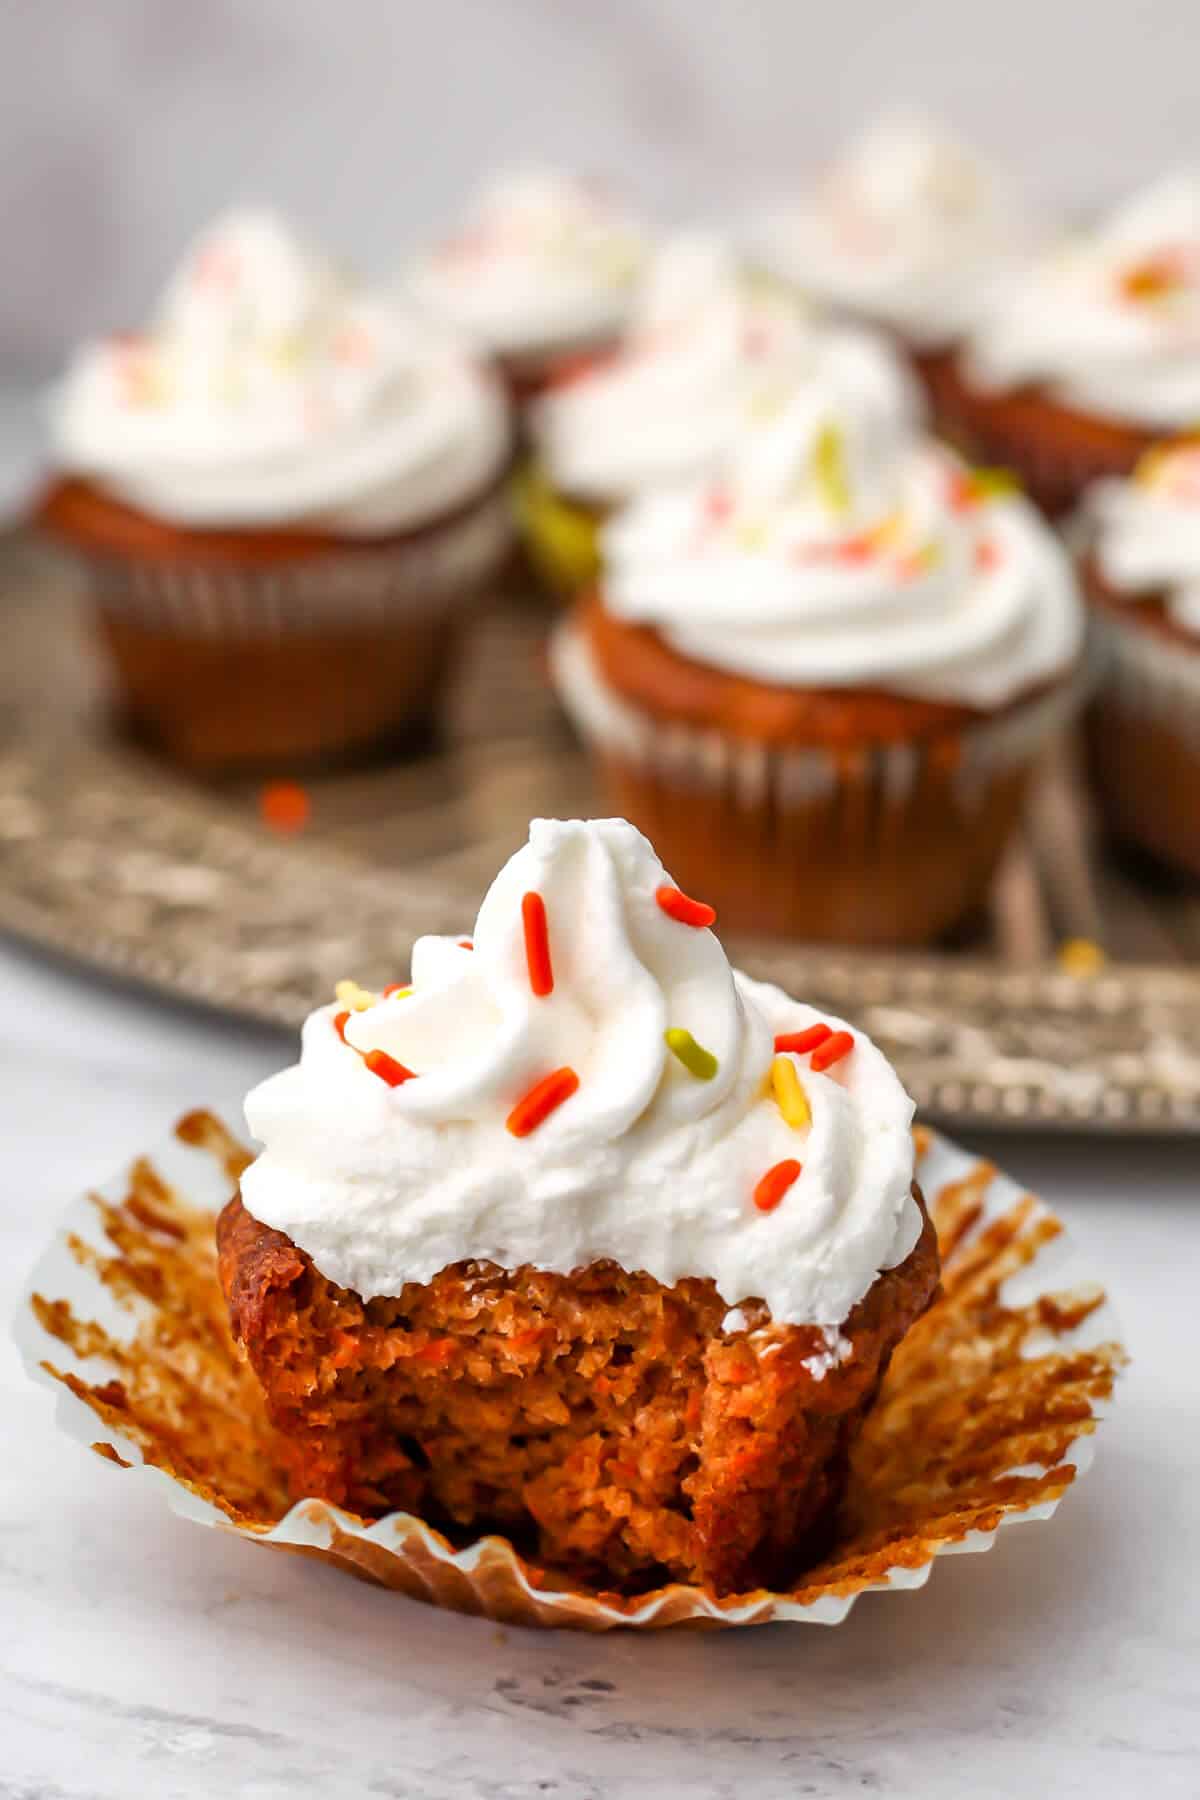 A vegan carrot cupcake with a bite out of it with a plate of cupcakes behind it.